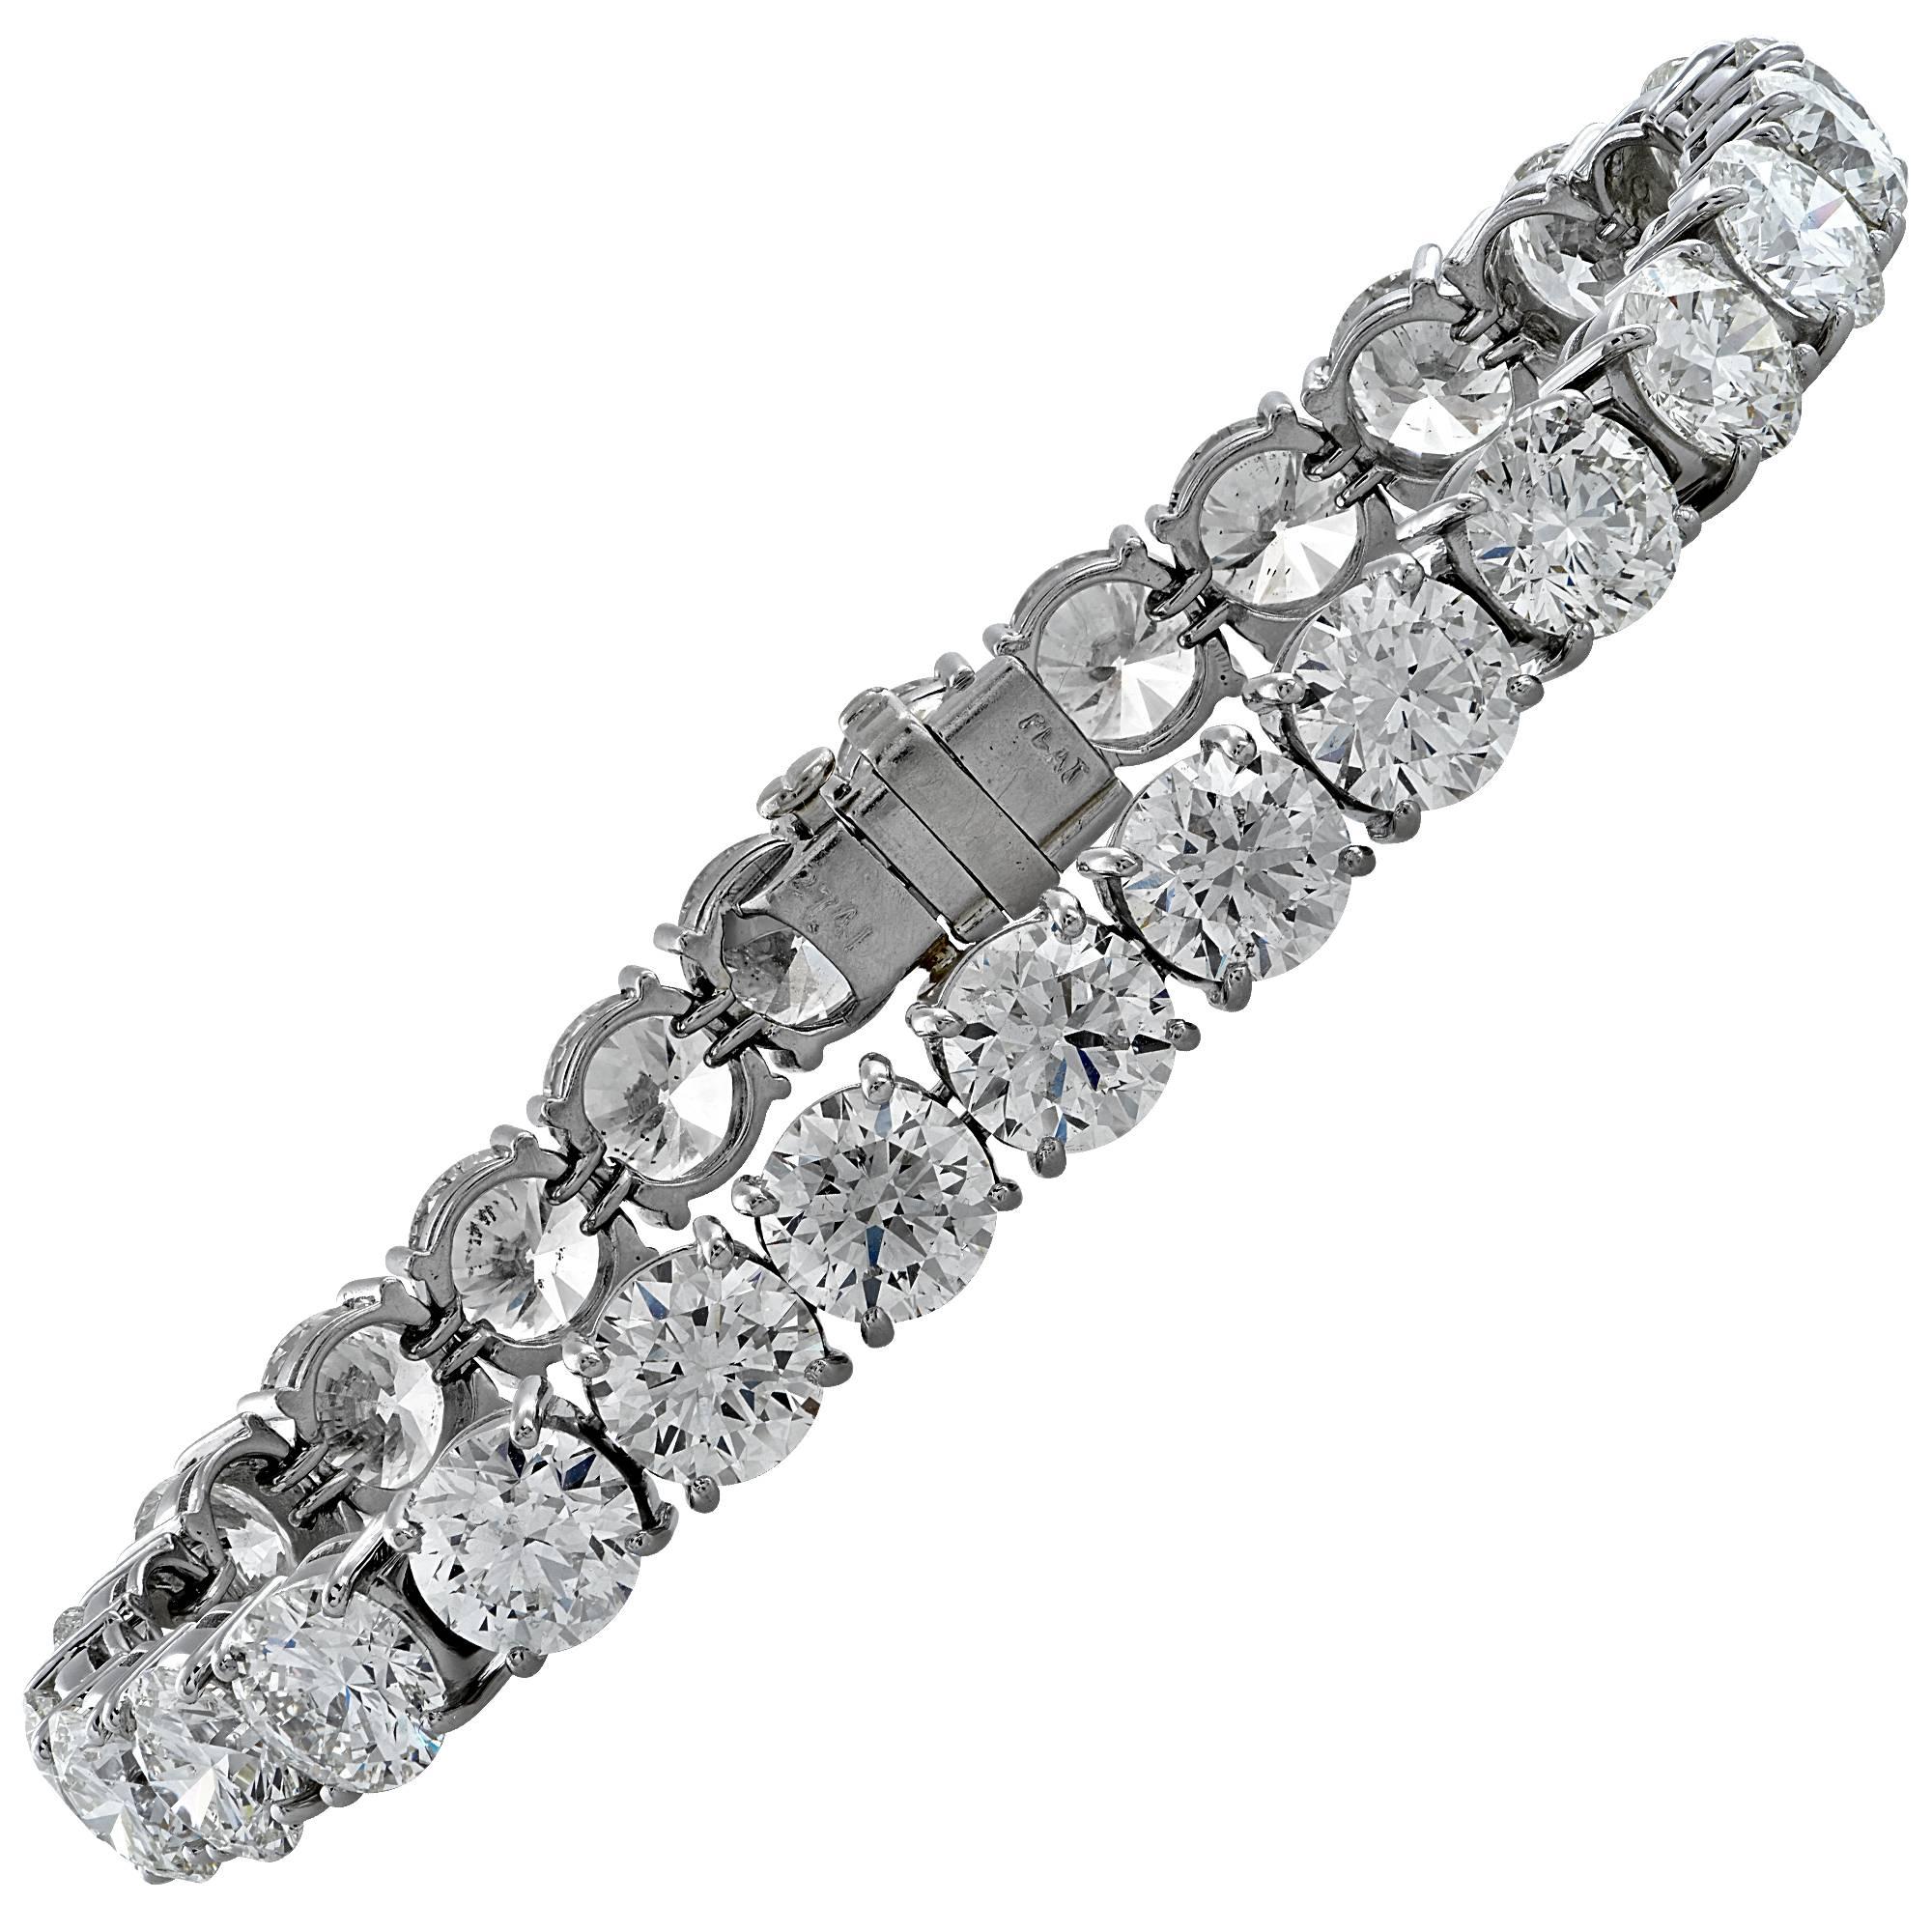 Platinum bracelet containing 27 round brilliant cut diamonds weighing 27.97ct.

This bracelet measures 7 inches.
It is stamped and/or tested as platinum.
The metal weight is 26.59 grams.

This diamond bracelet is accompanied by a retail appraisal